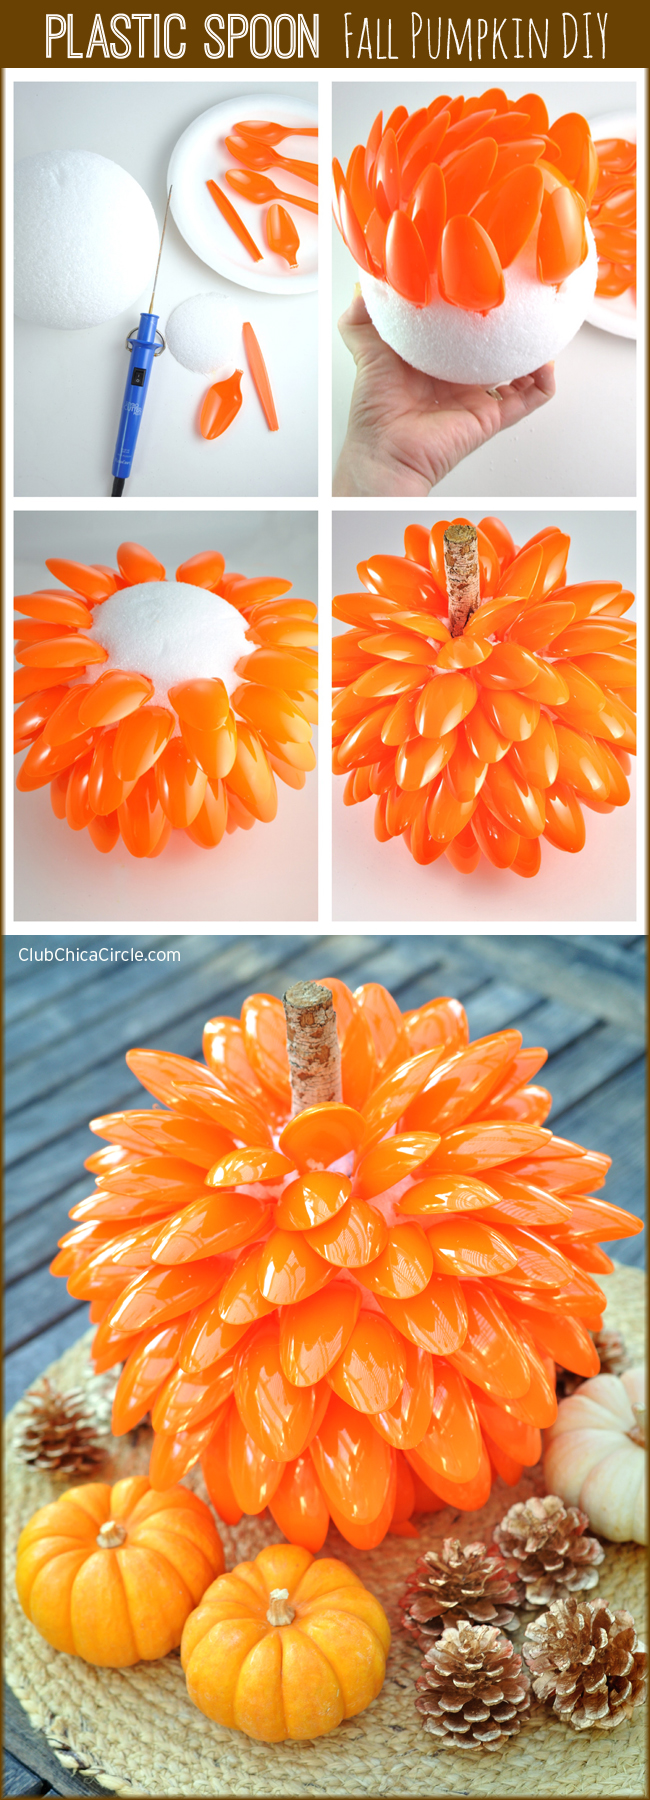 How to Make a Pumpkin with Plastic Spoons and a Foam Ball